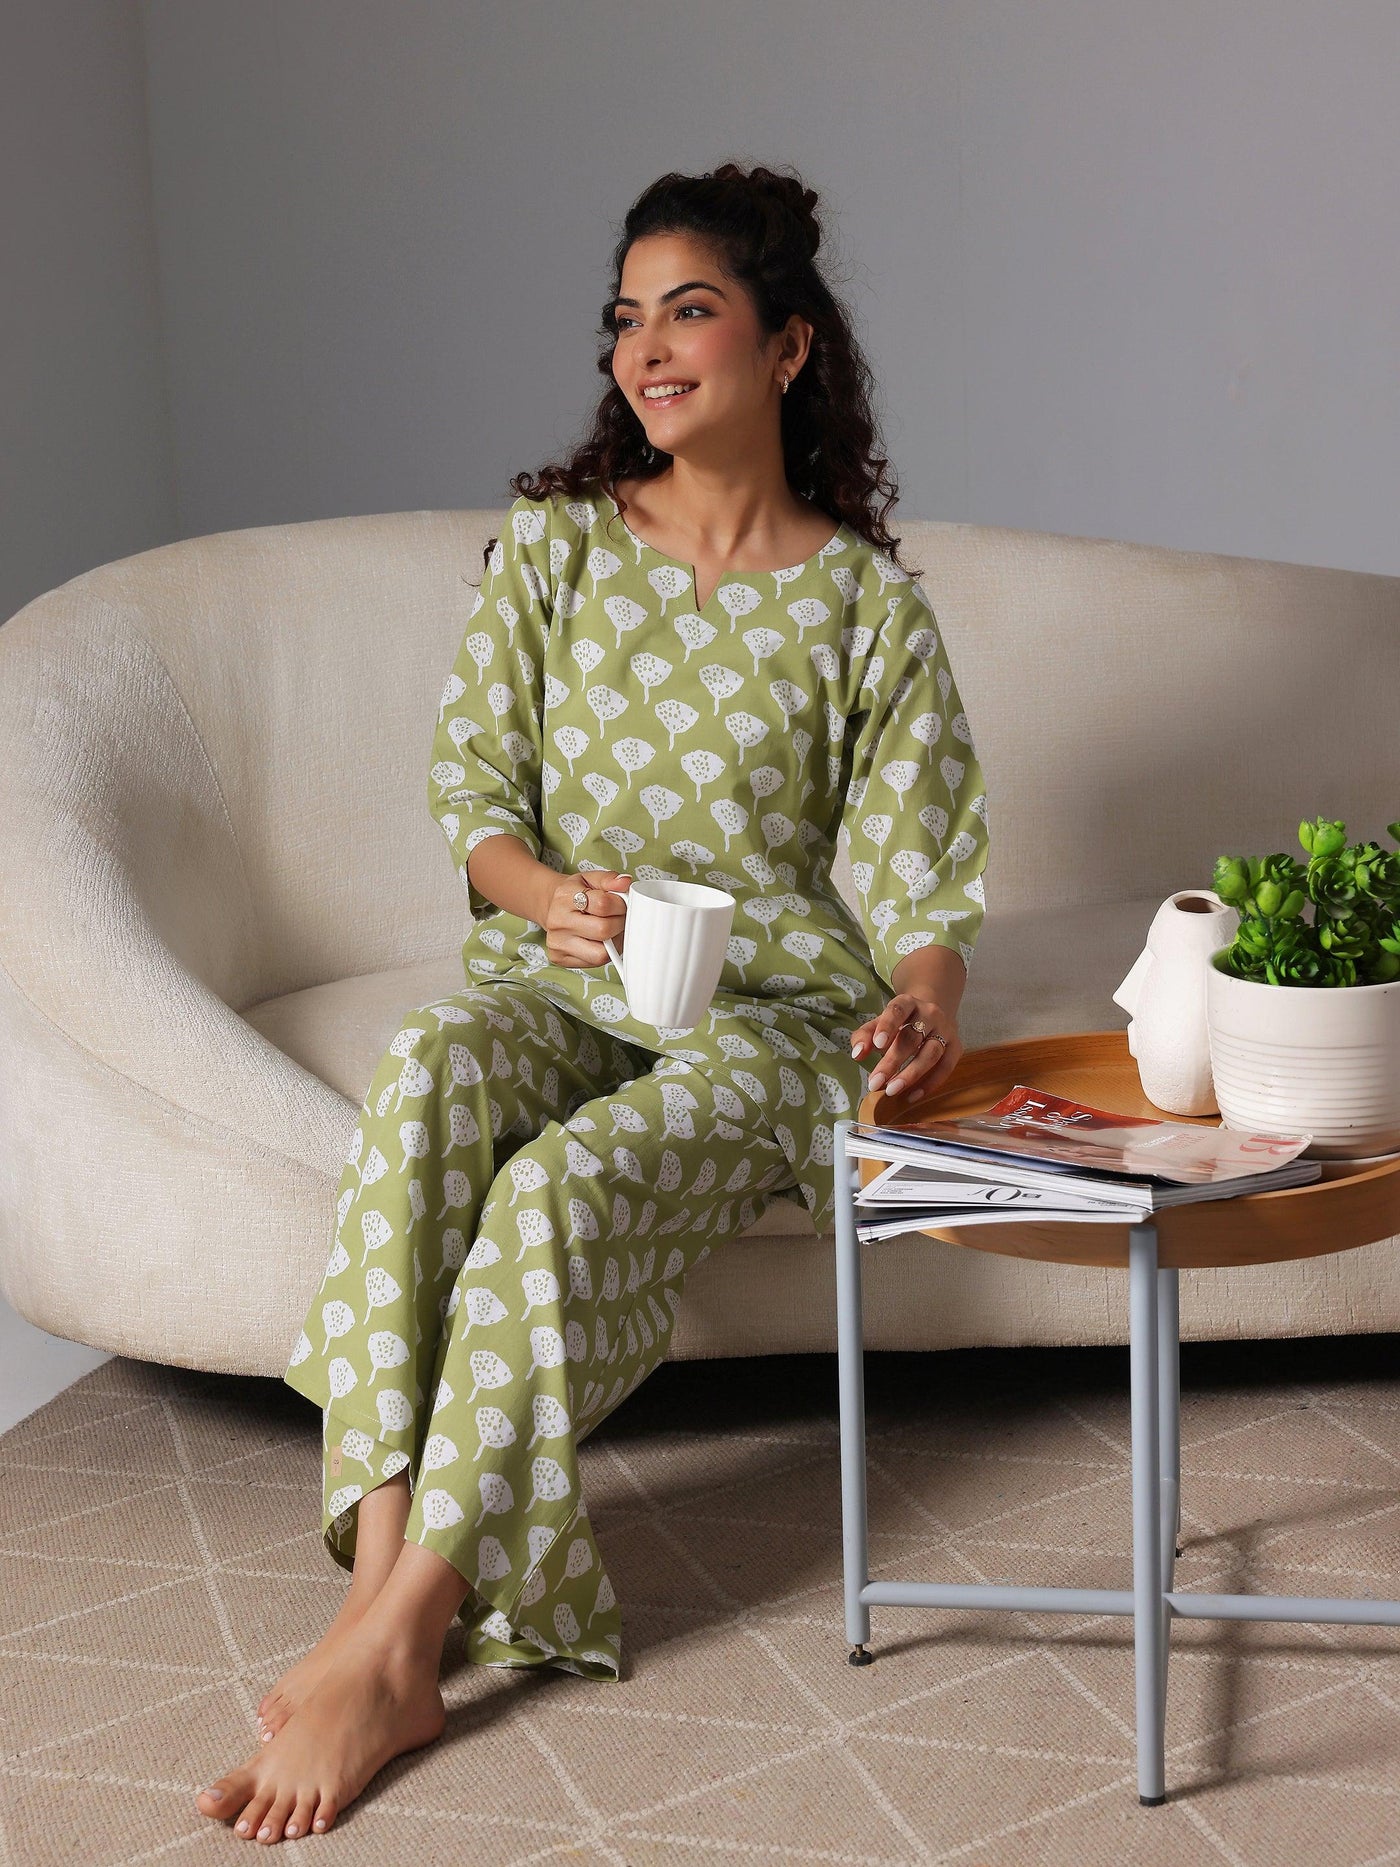 Green Printed Cotton Night Suits - Libas